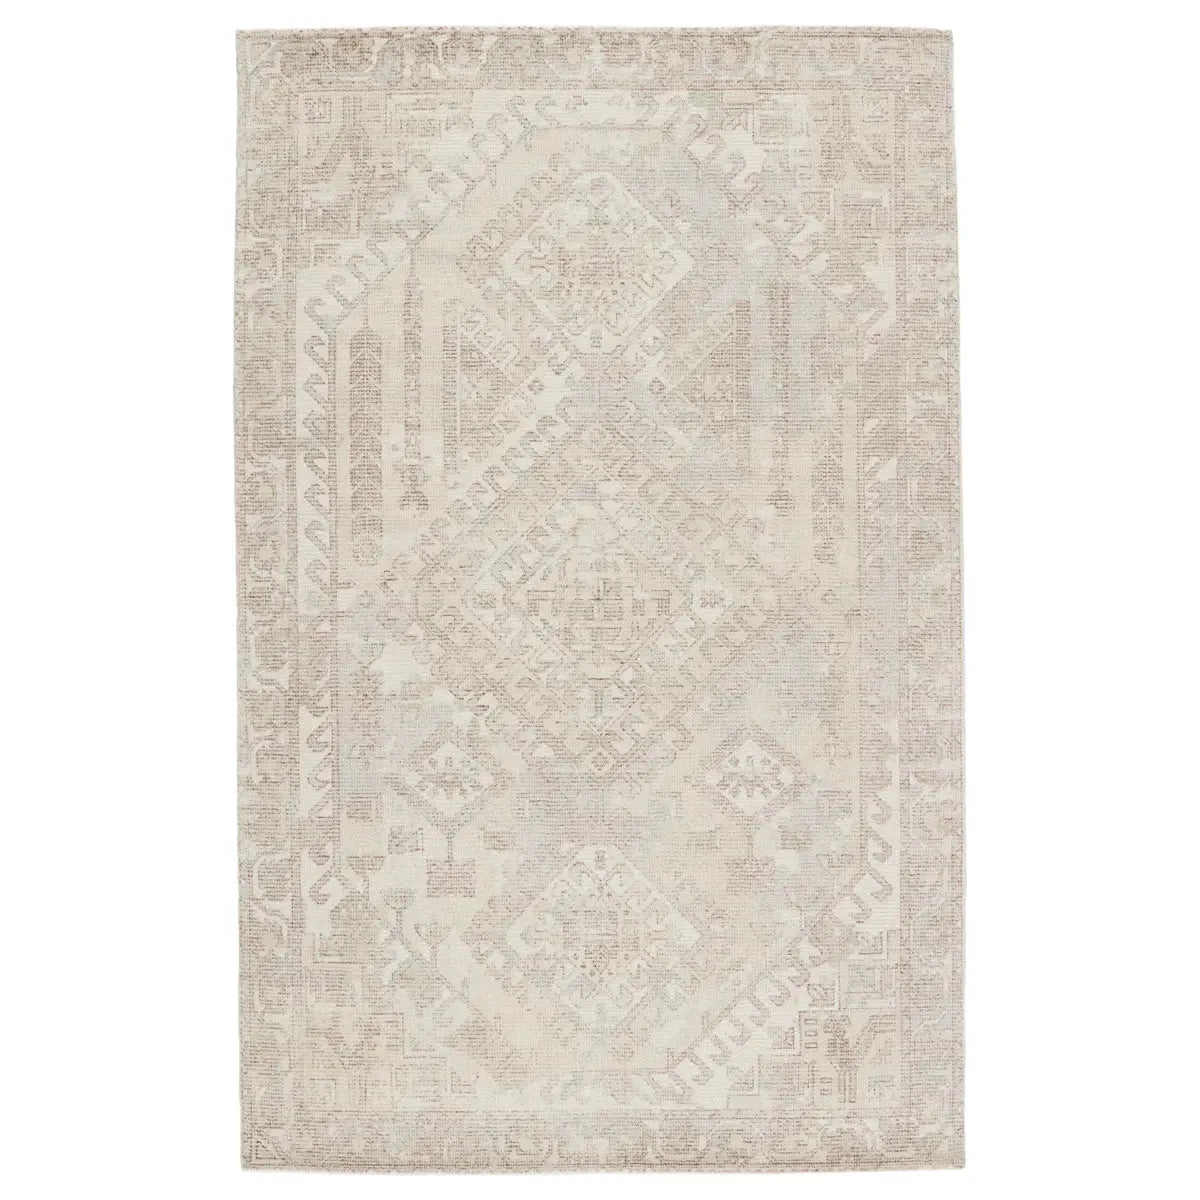 The handwoven Blythe Arlowe Silver Birch / Winter White Area Rug by Jaipur Living  features a cut-loop pile and soft-yet-textured feel. The blend of natural wool and luxe rayon made from bamboo grounds spaces with soft, inviting texture.